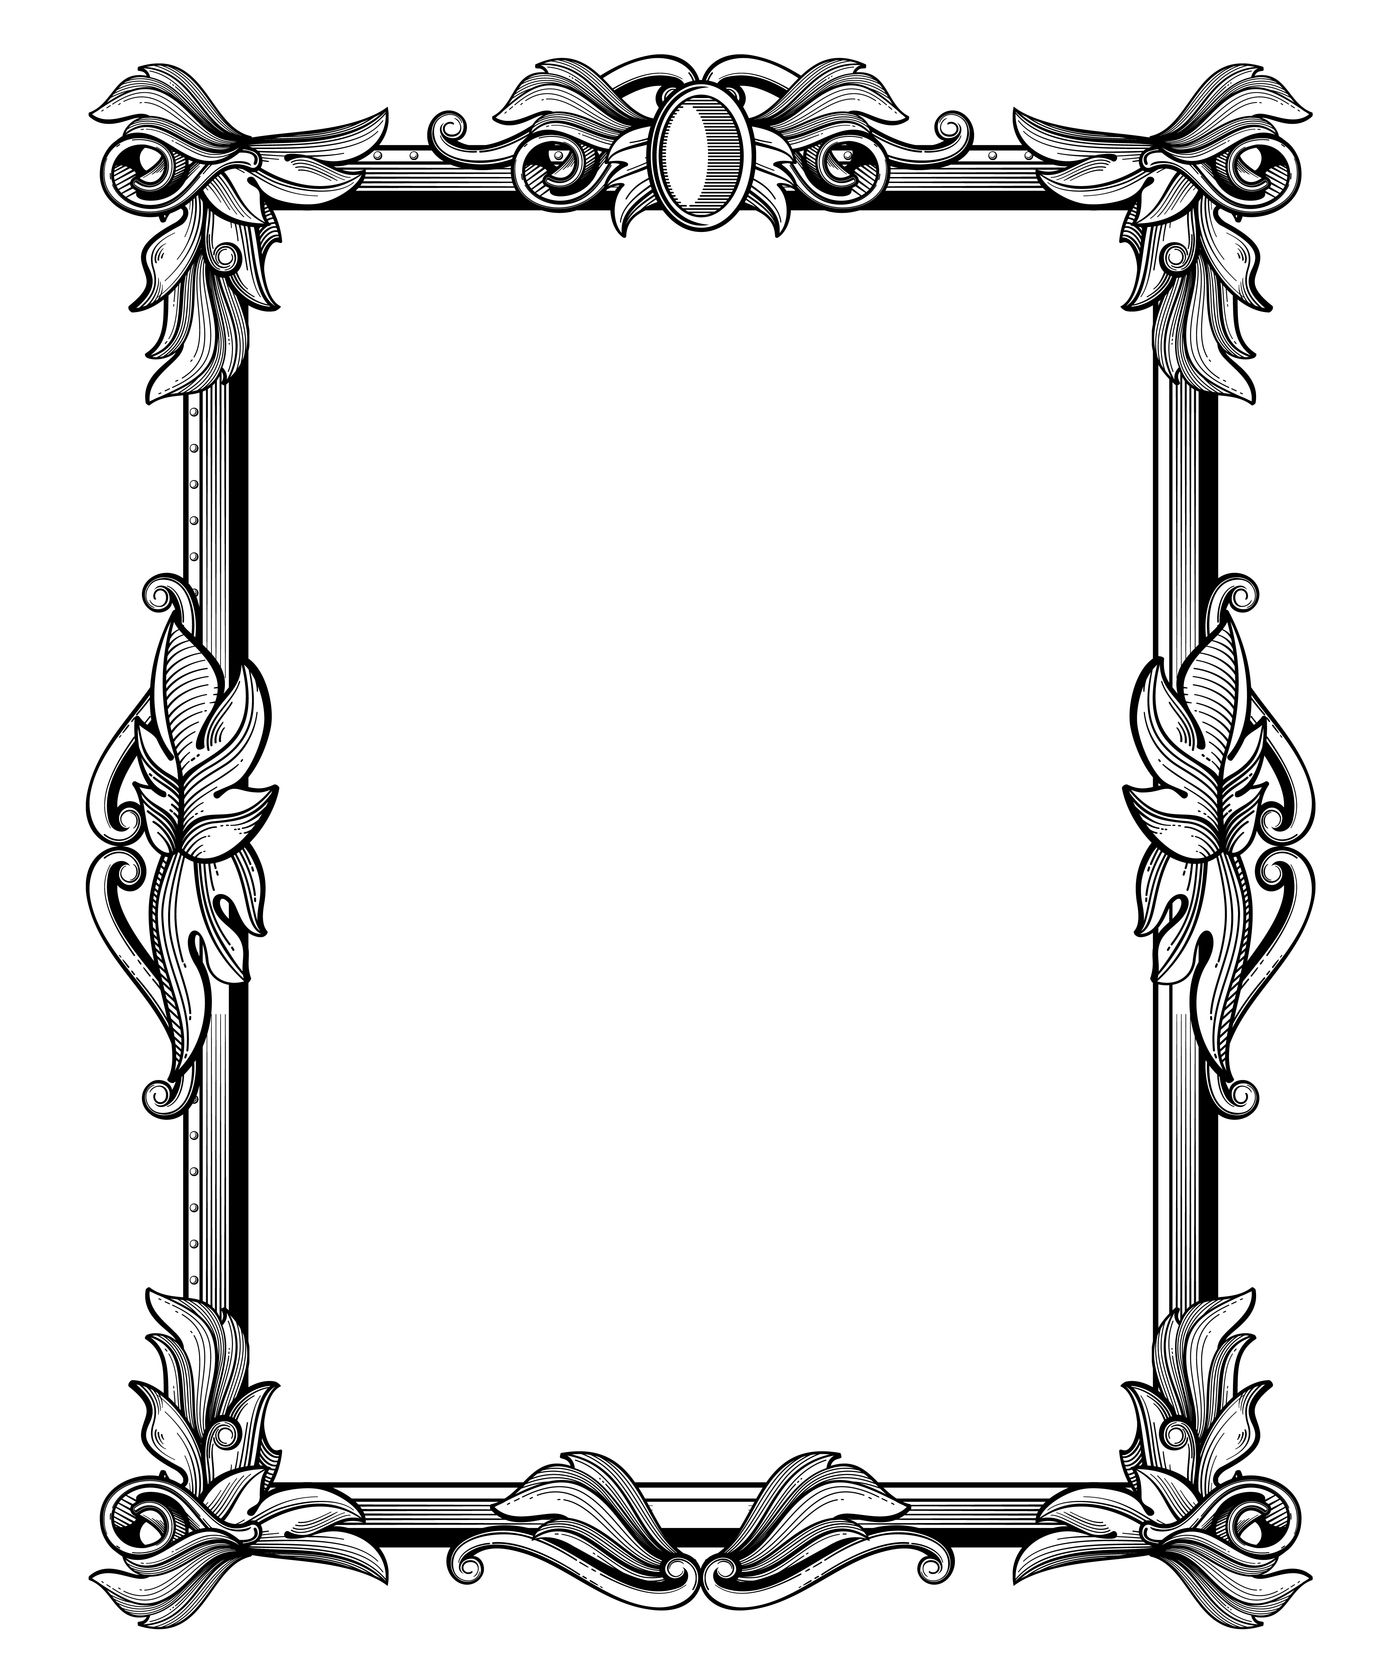 Download Retro, antique baroque border frame with scroll ornaments ...